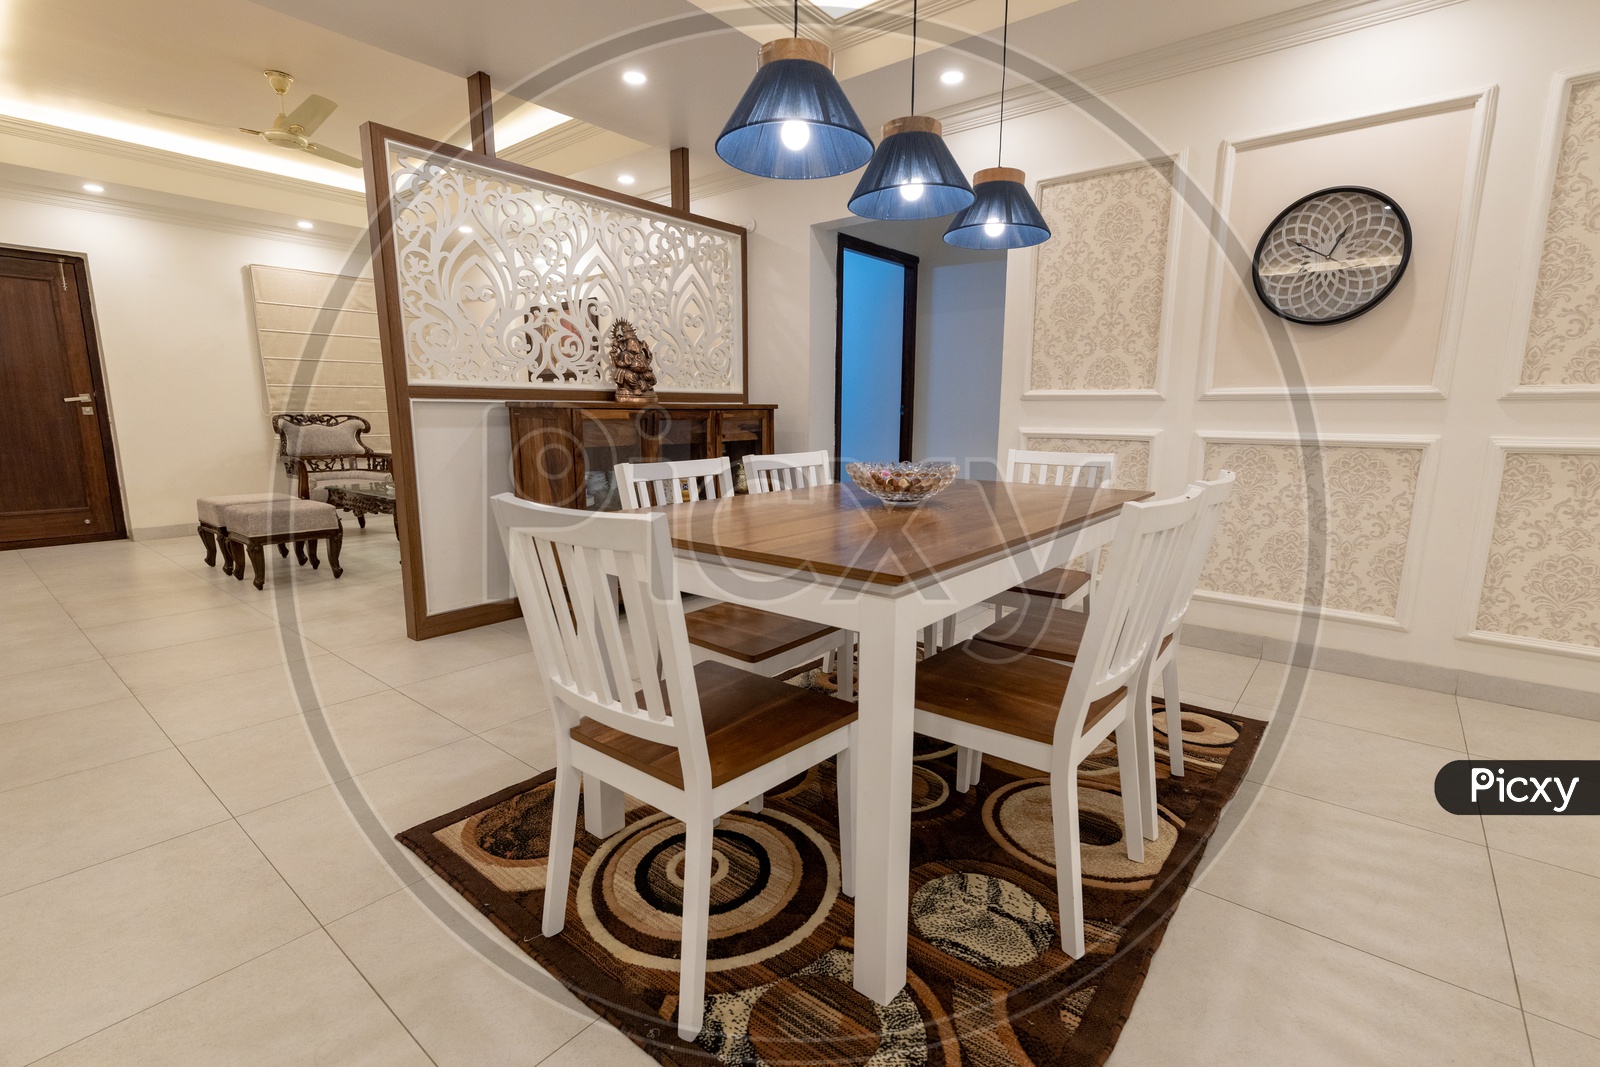 Bright Cozy Design Of a Dining Table And Interior Of a House